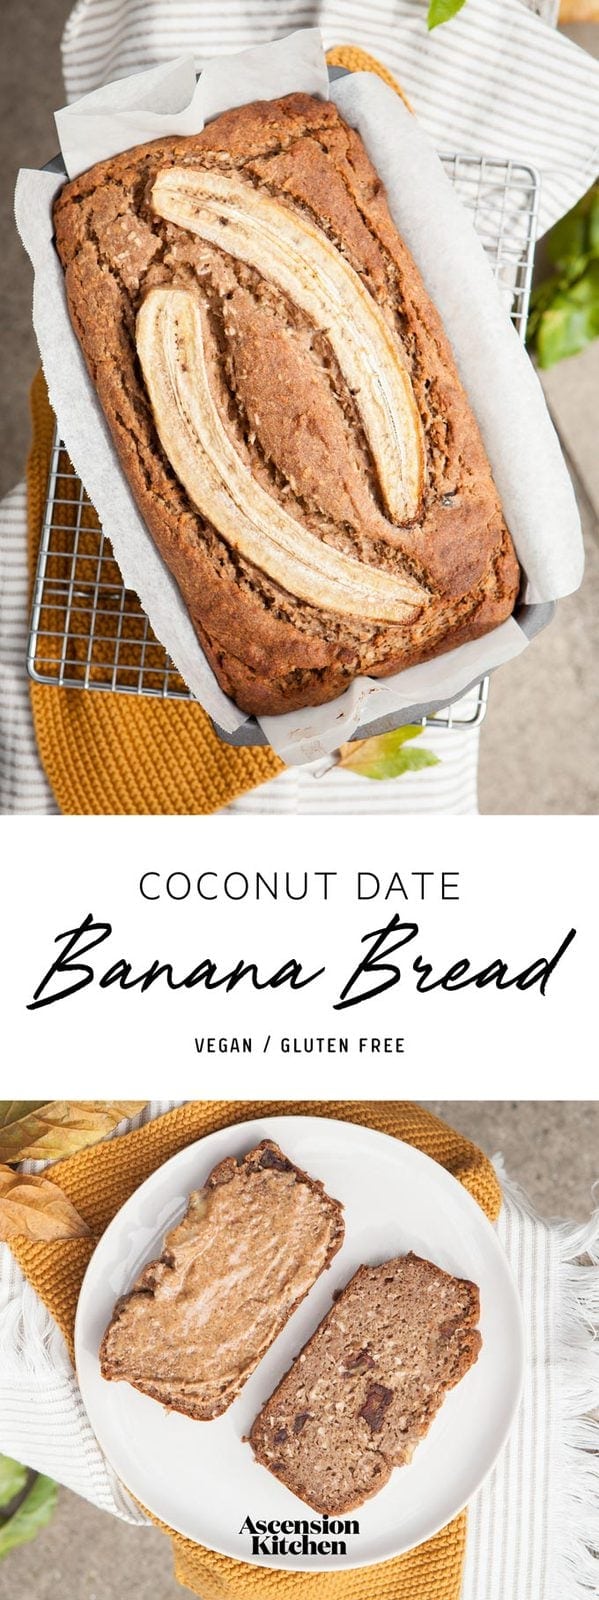 Gluten Free Vegan Banana Bread, no added sugar, sweetened naturally with coconut and whole dates. A family sized recipe. #glutenfreeveganbananabread #glutenfreeveganbananabreadeasy #glutenfreeveganbananabreadrecipe #glutenfreeveganbananabreadfamilies #veganbananabread #glutenfreedairyfreebananabread #AscensionKitchen  // Pin to your own inspiration board! //